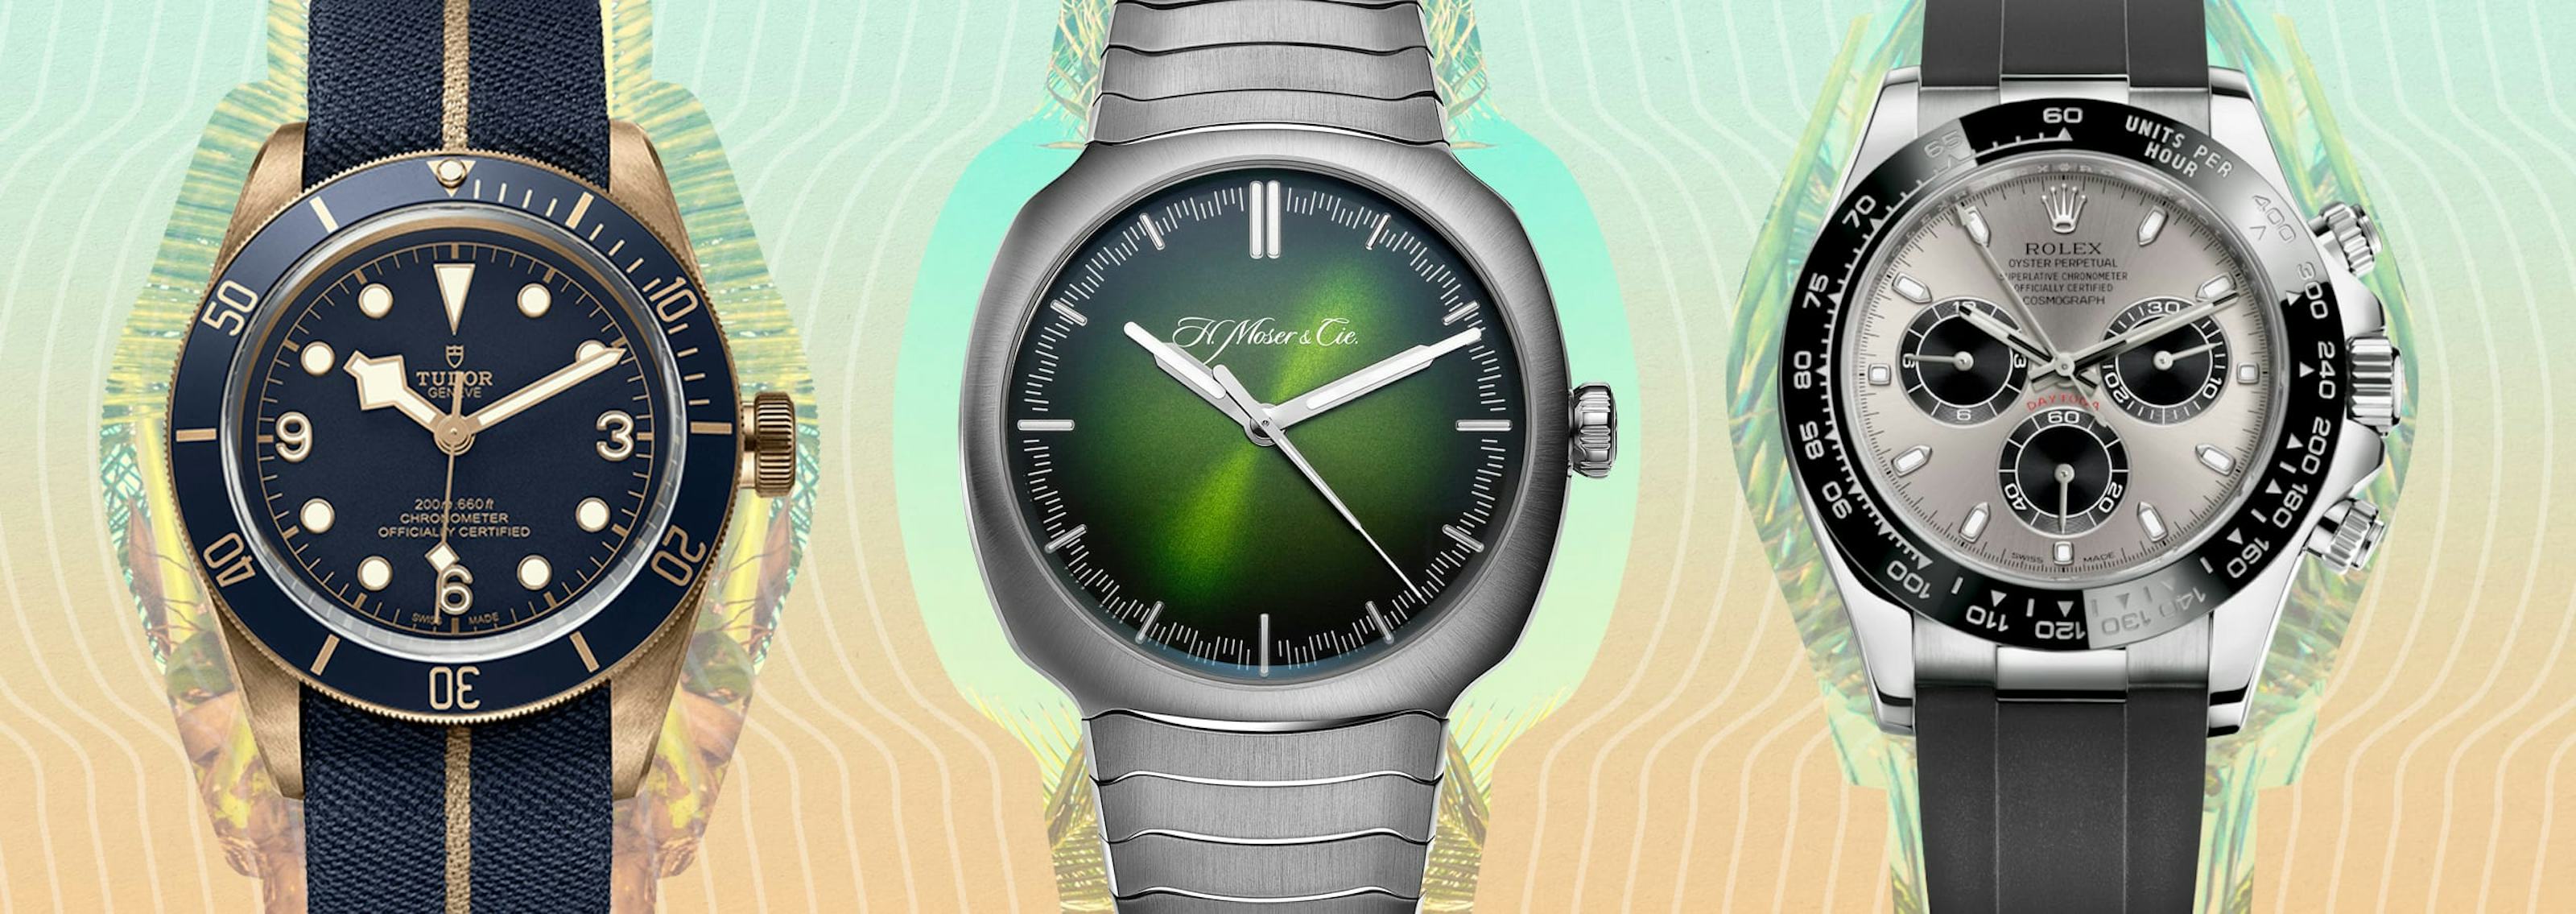 A Round-Up of Favorite Summer Watches from Our House